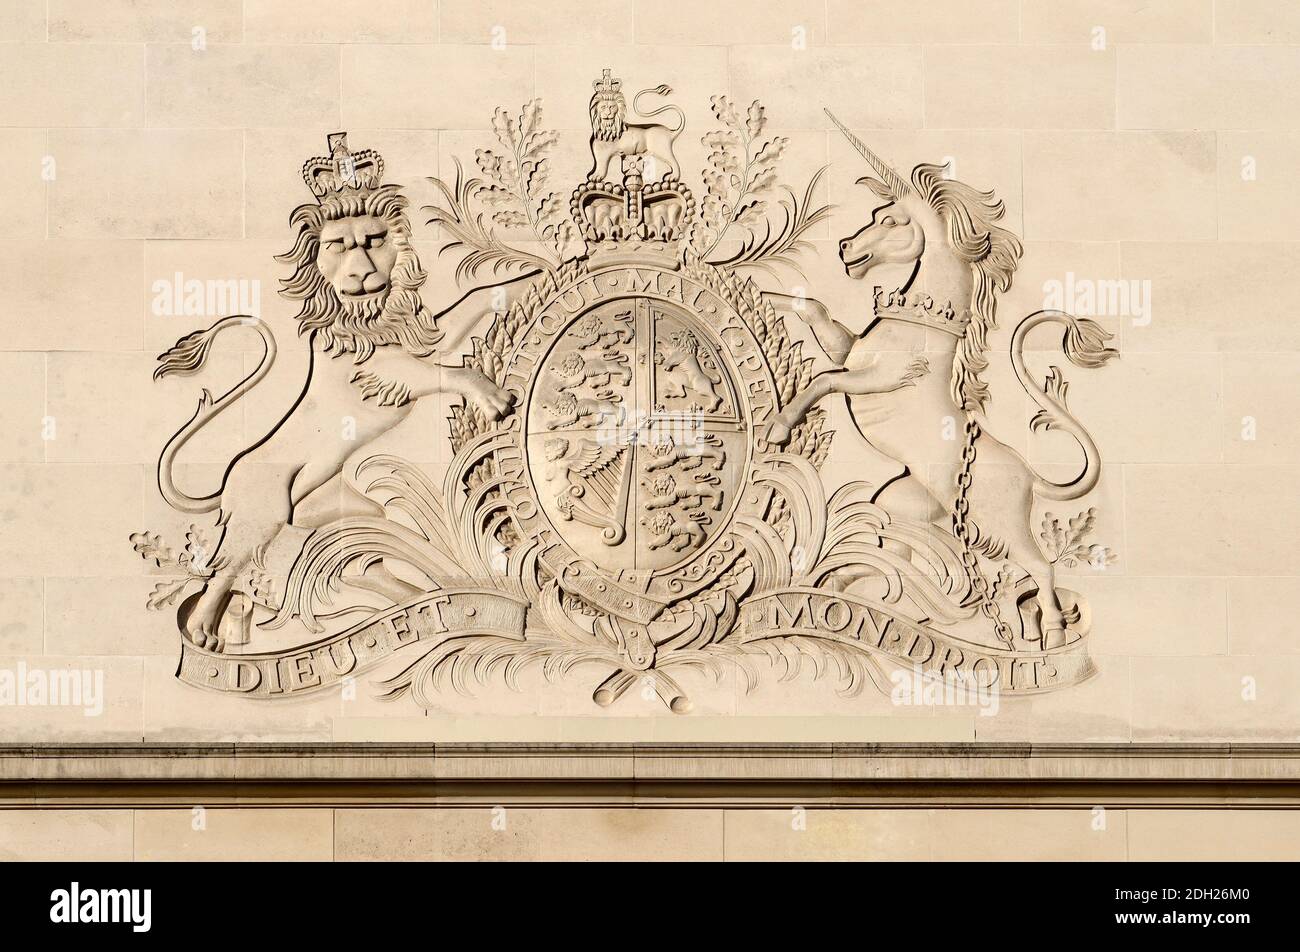 London, England, UK. British Royal Coat of Arms carved into the wall of the Royal Opera House, Covent Garden Stock Photo